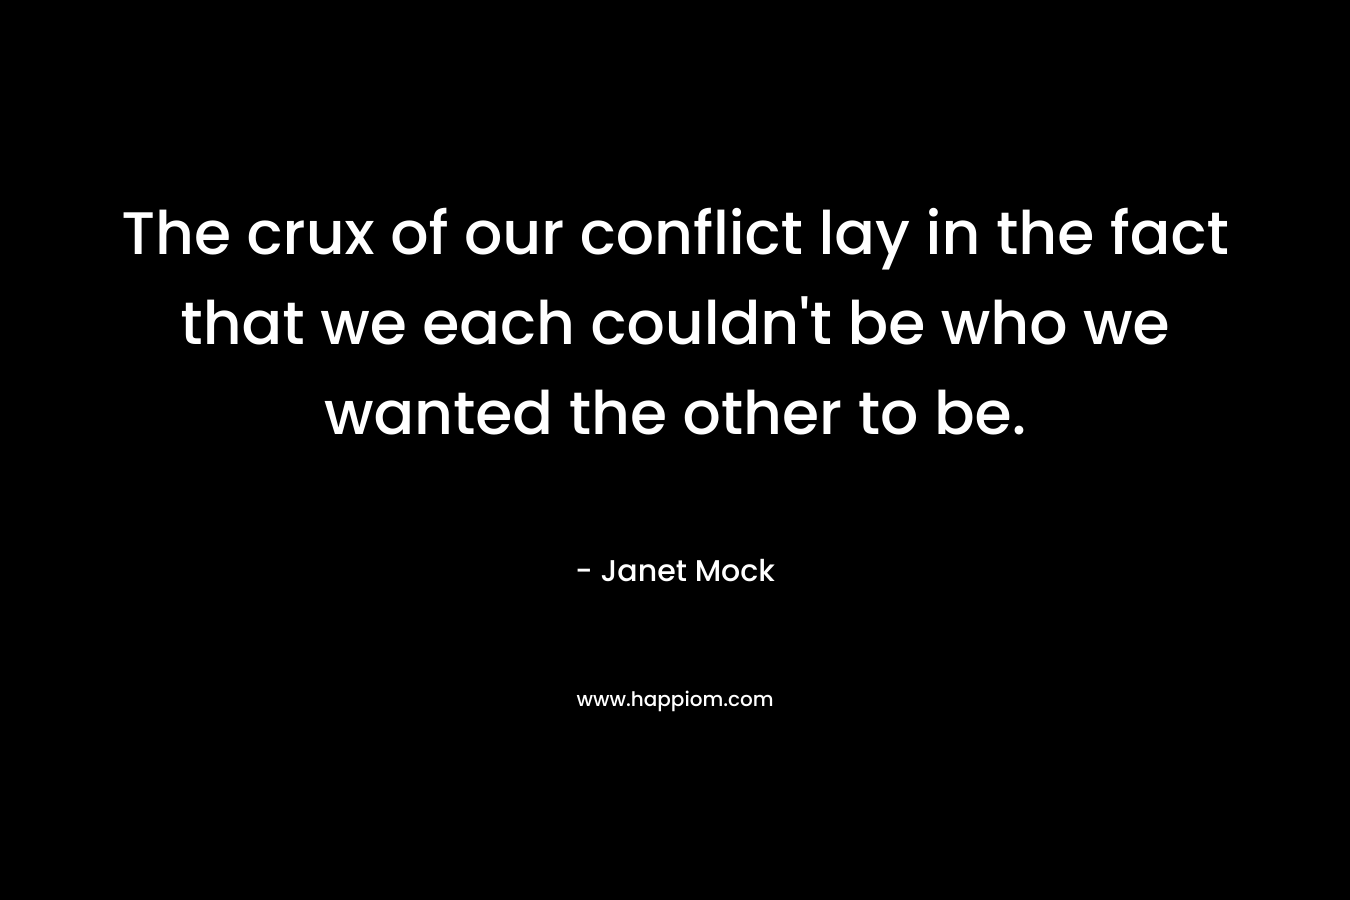 The crux of our conflict lay in the fact that we each couldn't be who we wanted the other to be.